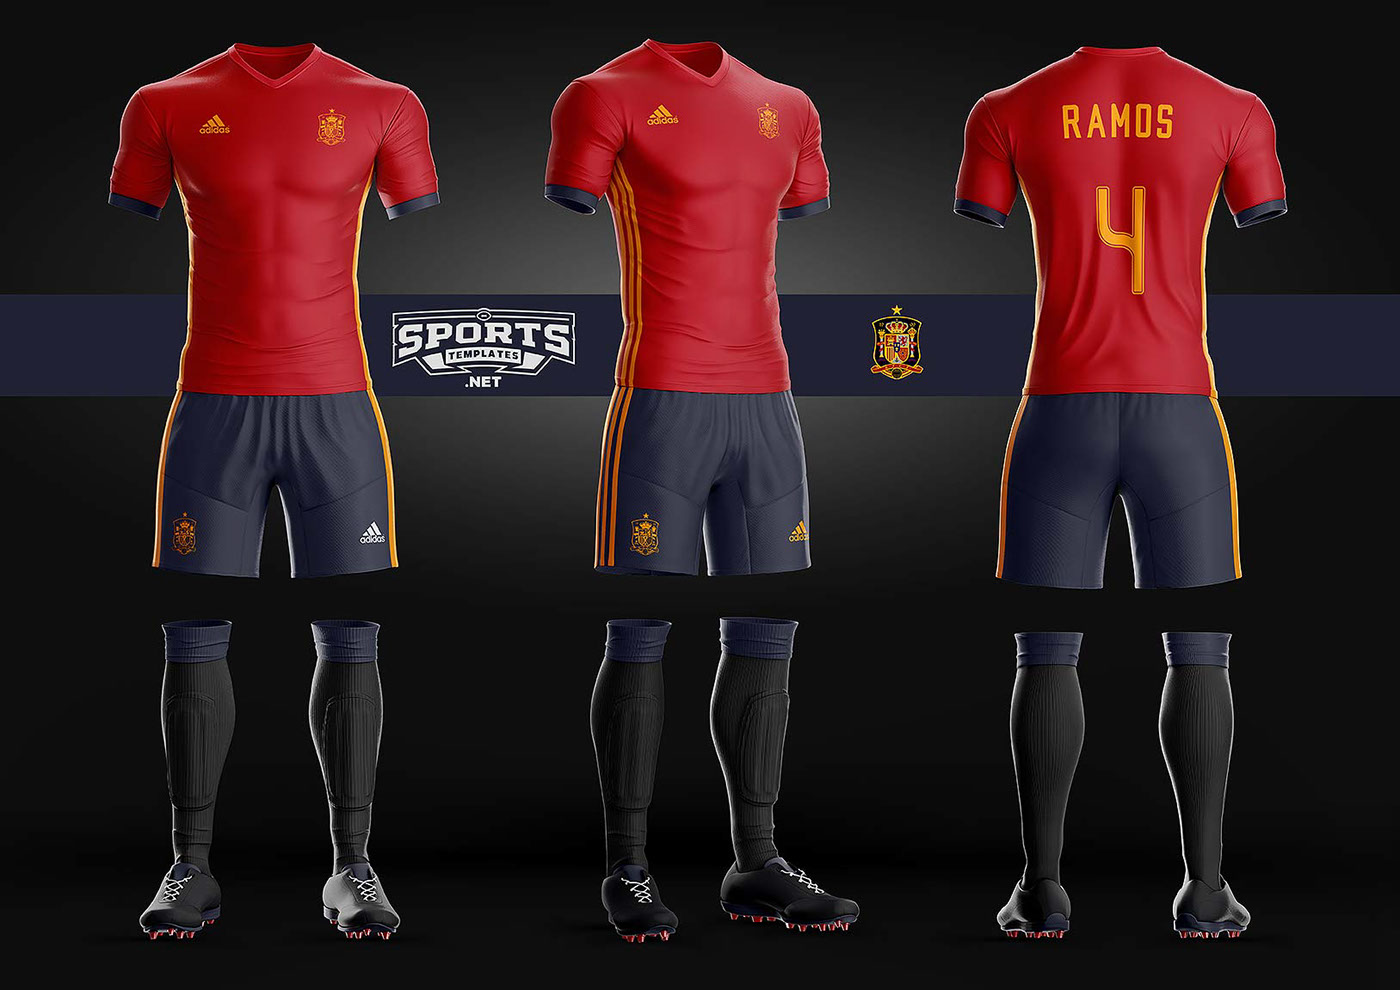 Download The Most Realistic Soccer Kit Uniform Template is here! - Concepts - Chris Creamer's Sports ...